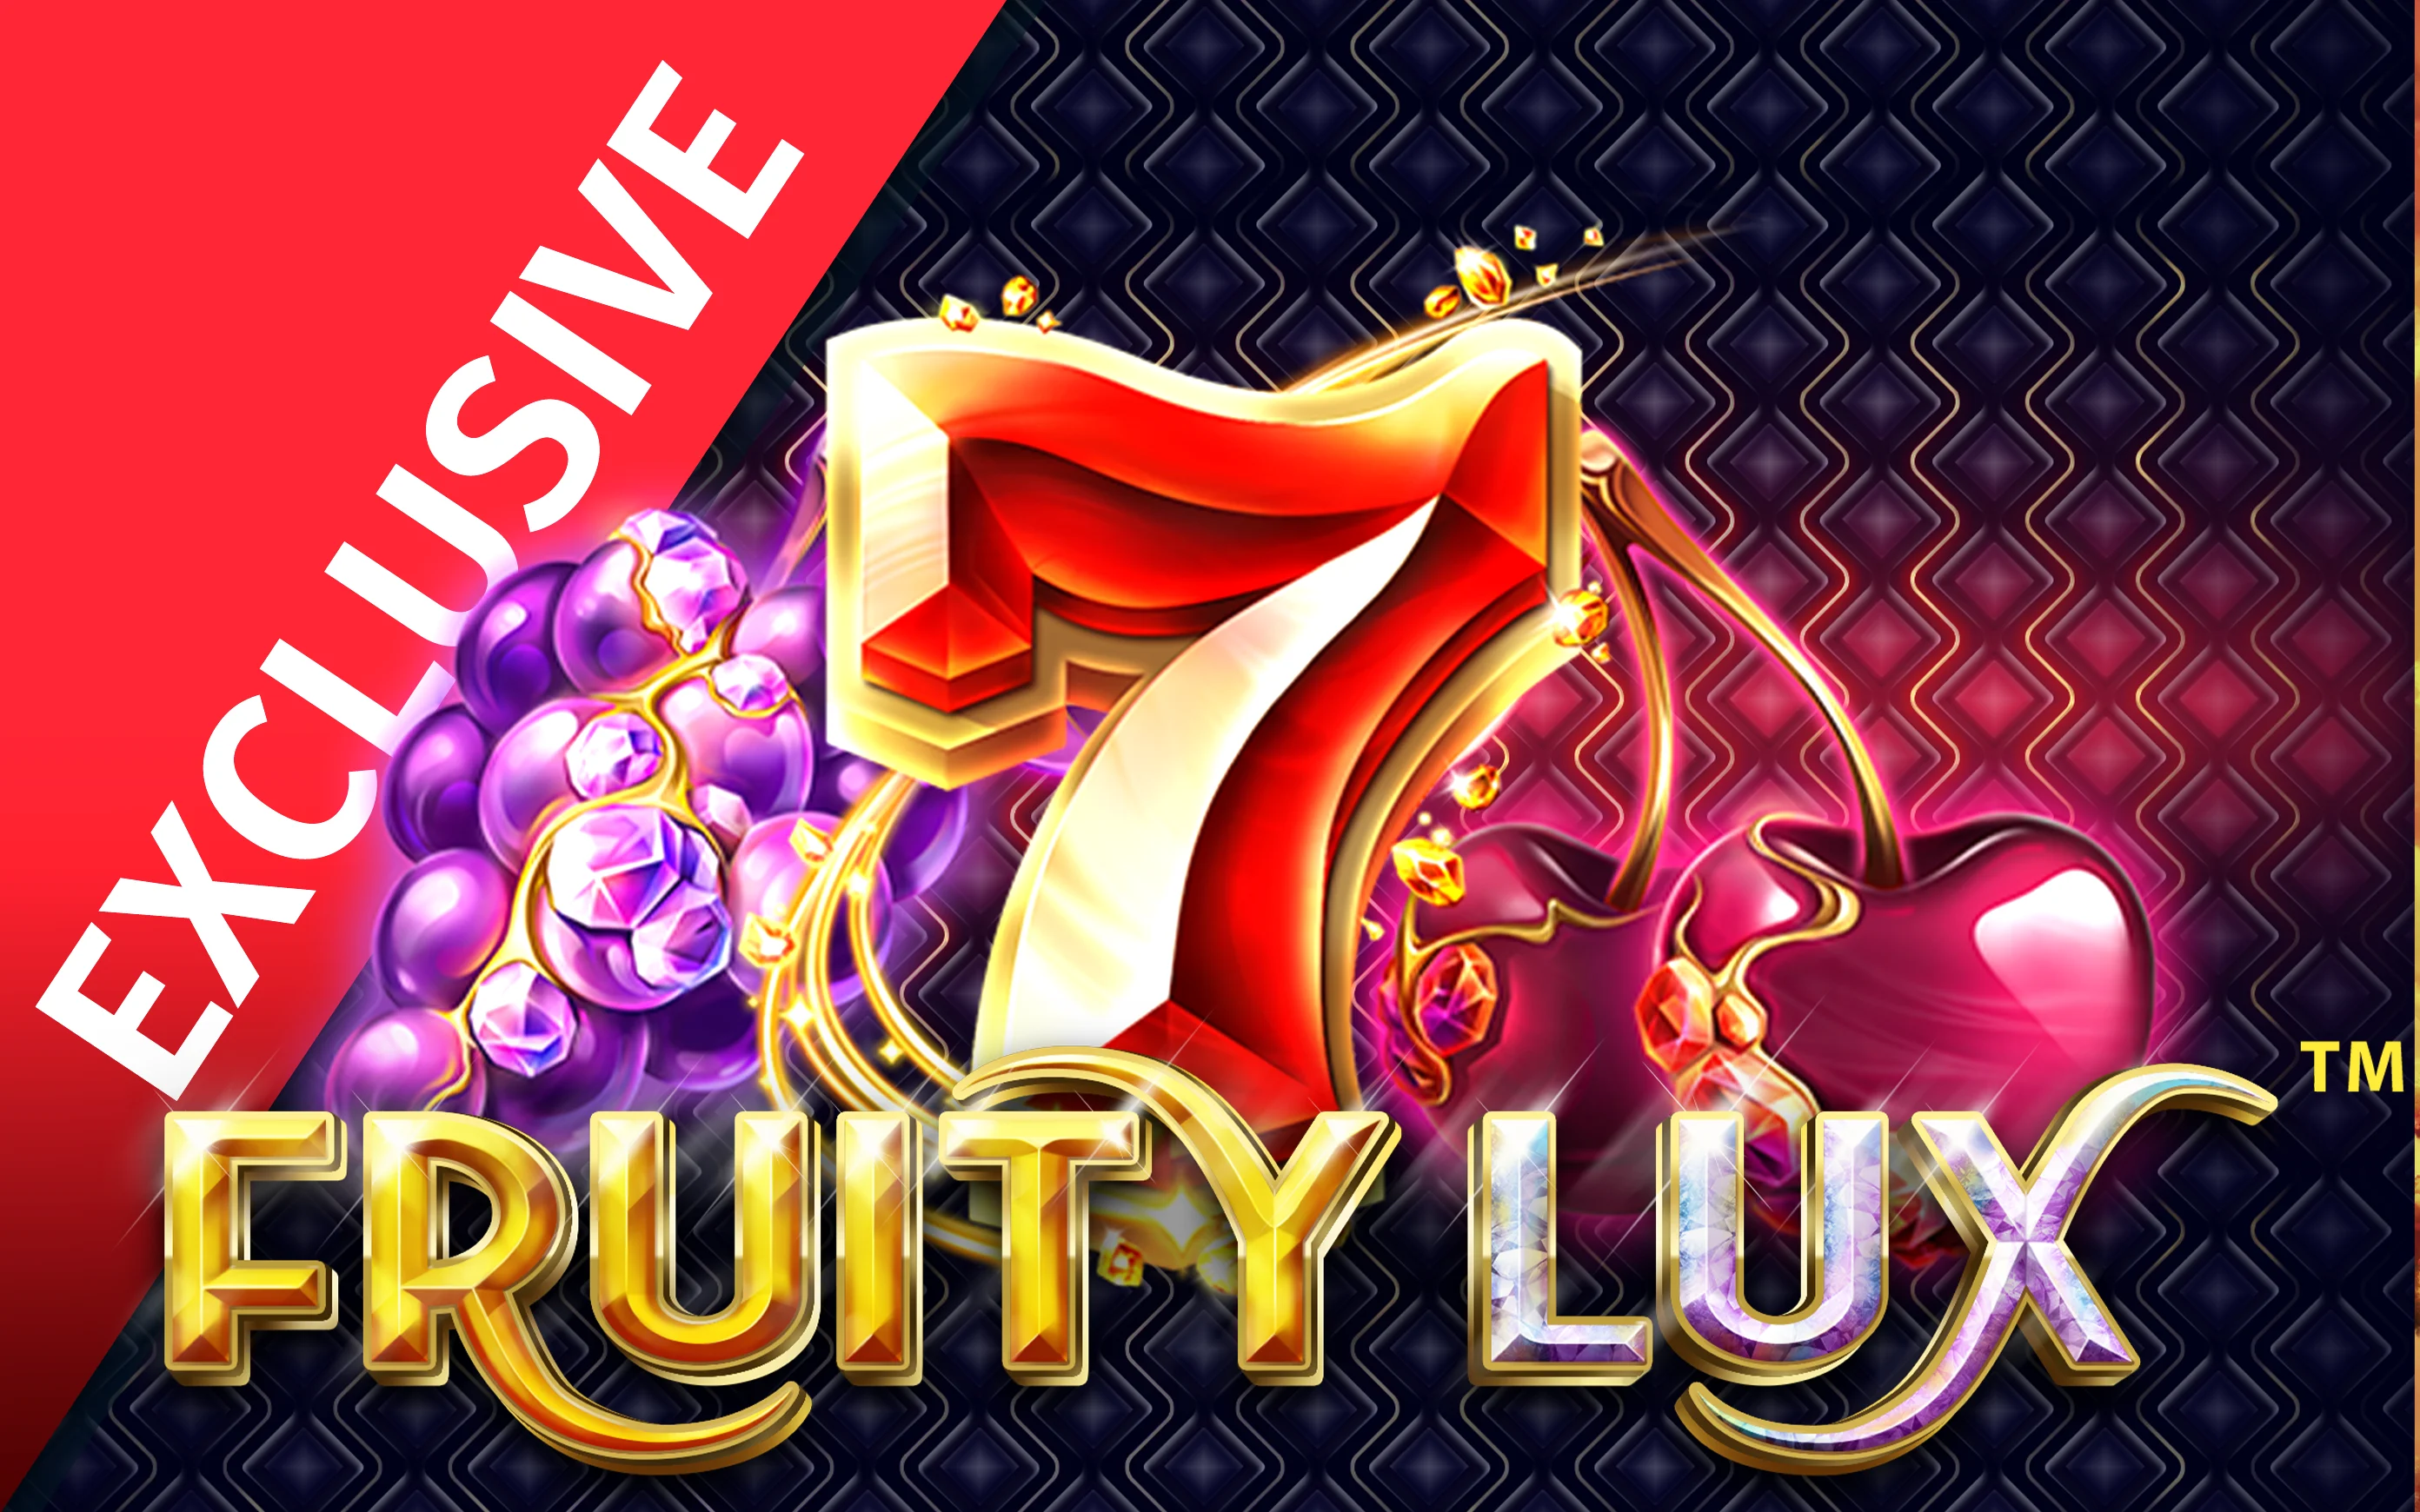 Play Fruity Lux on Starcasino.be online casino